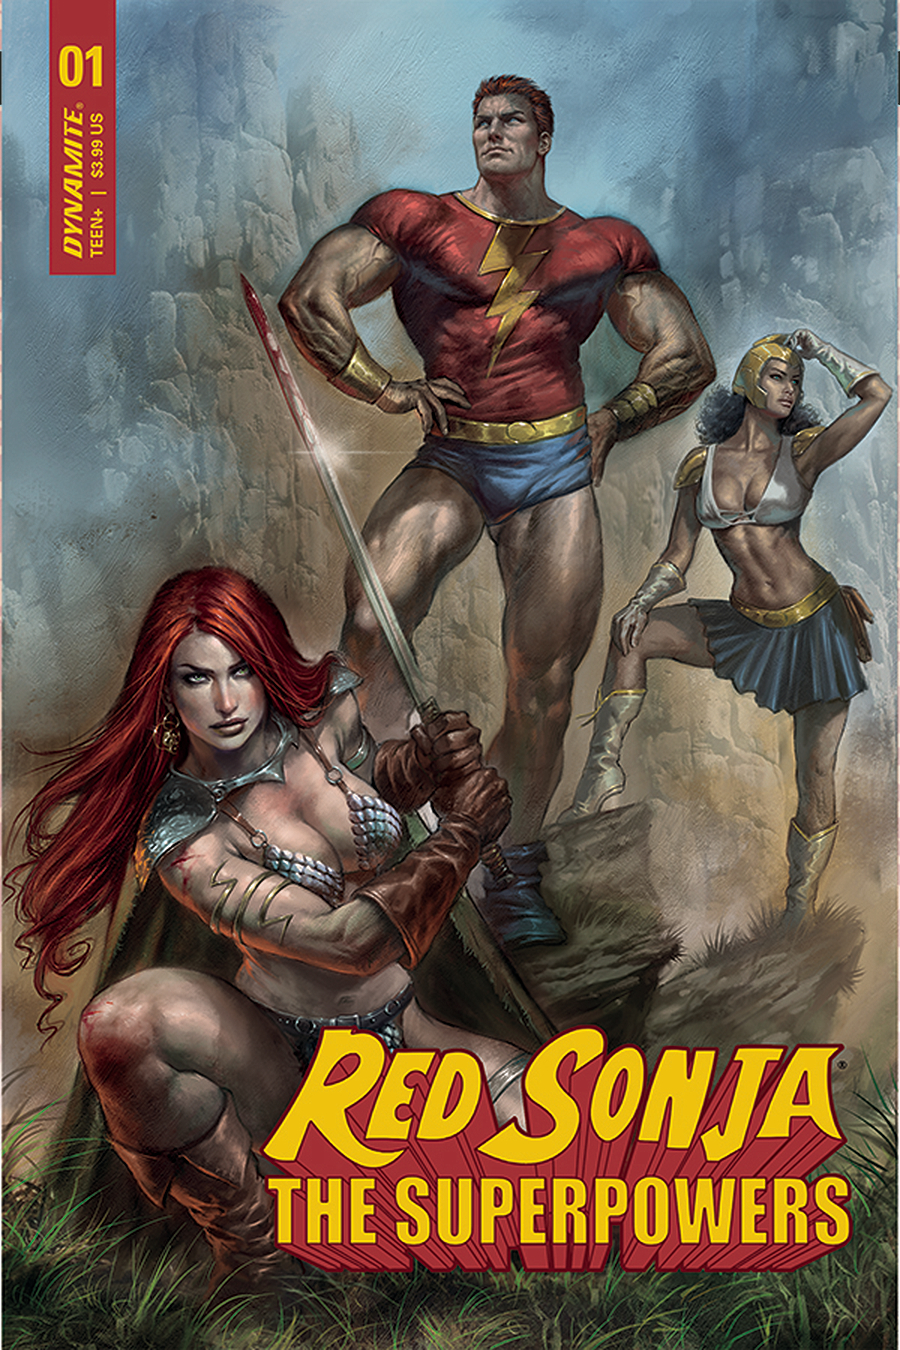 Red Sonja The Superpowers #1 Cover A Parrillo